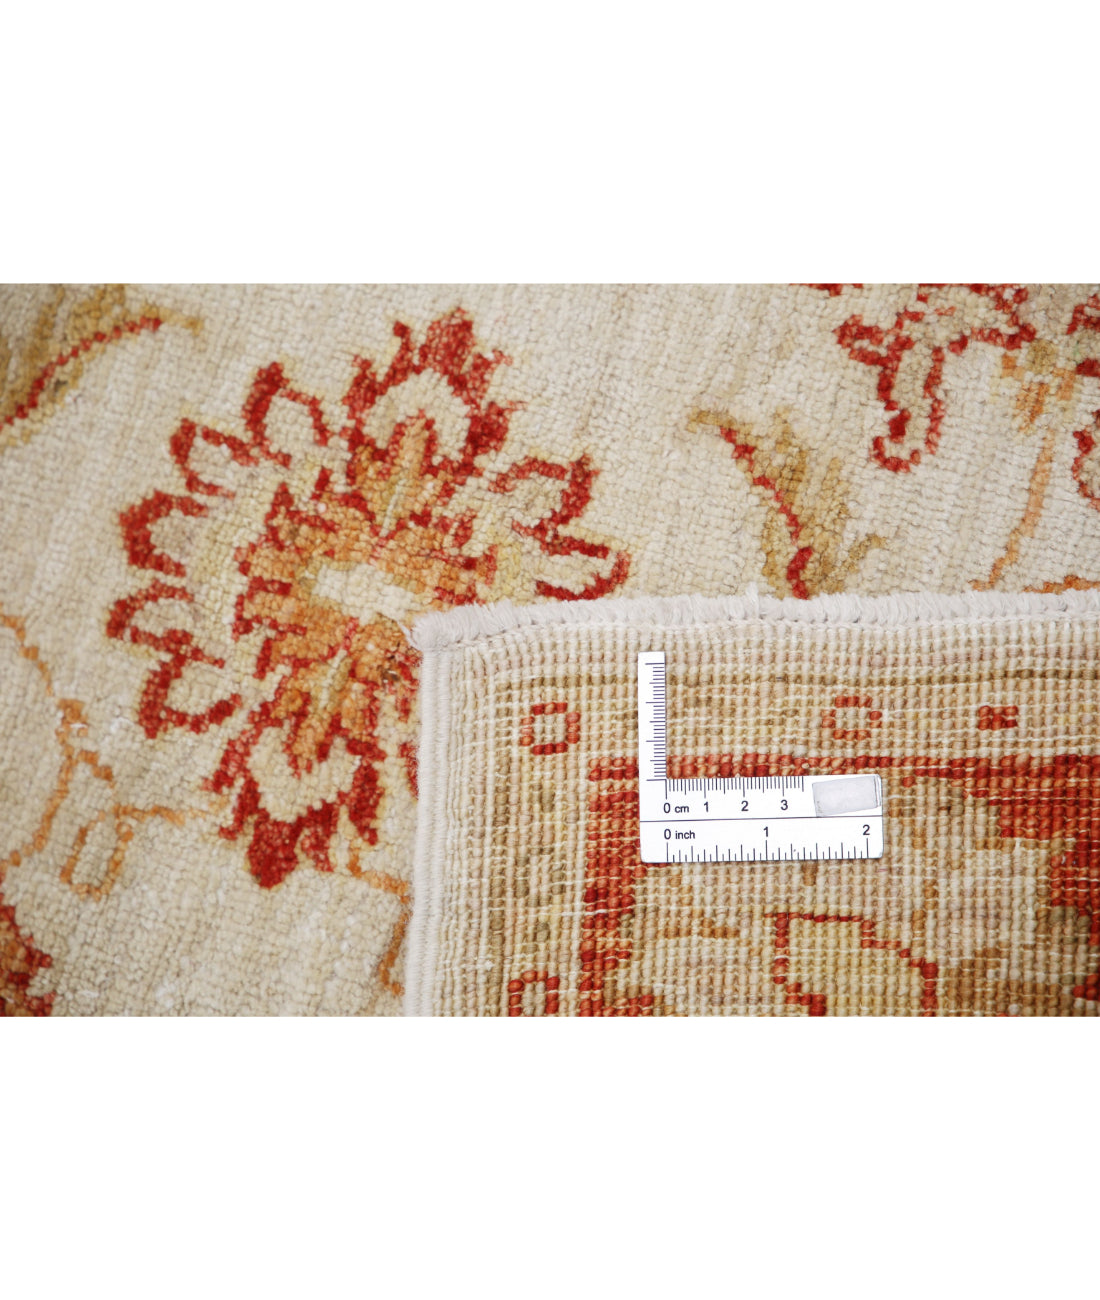 Ziegler 2'9'' X 3'10'' Hand-Knotted Wool Rug 2'9'' x 3'10'' (83 X 115) / Ivory / Red